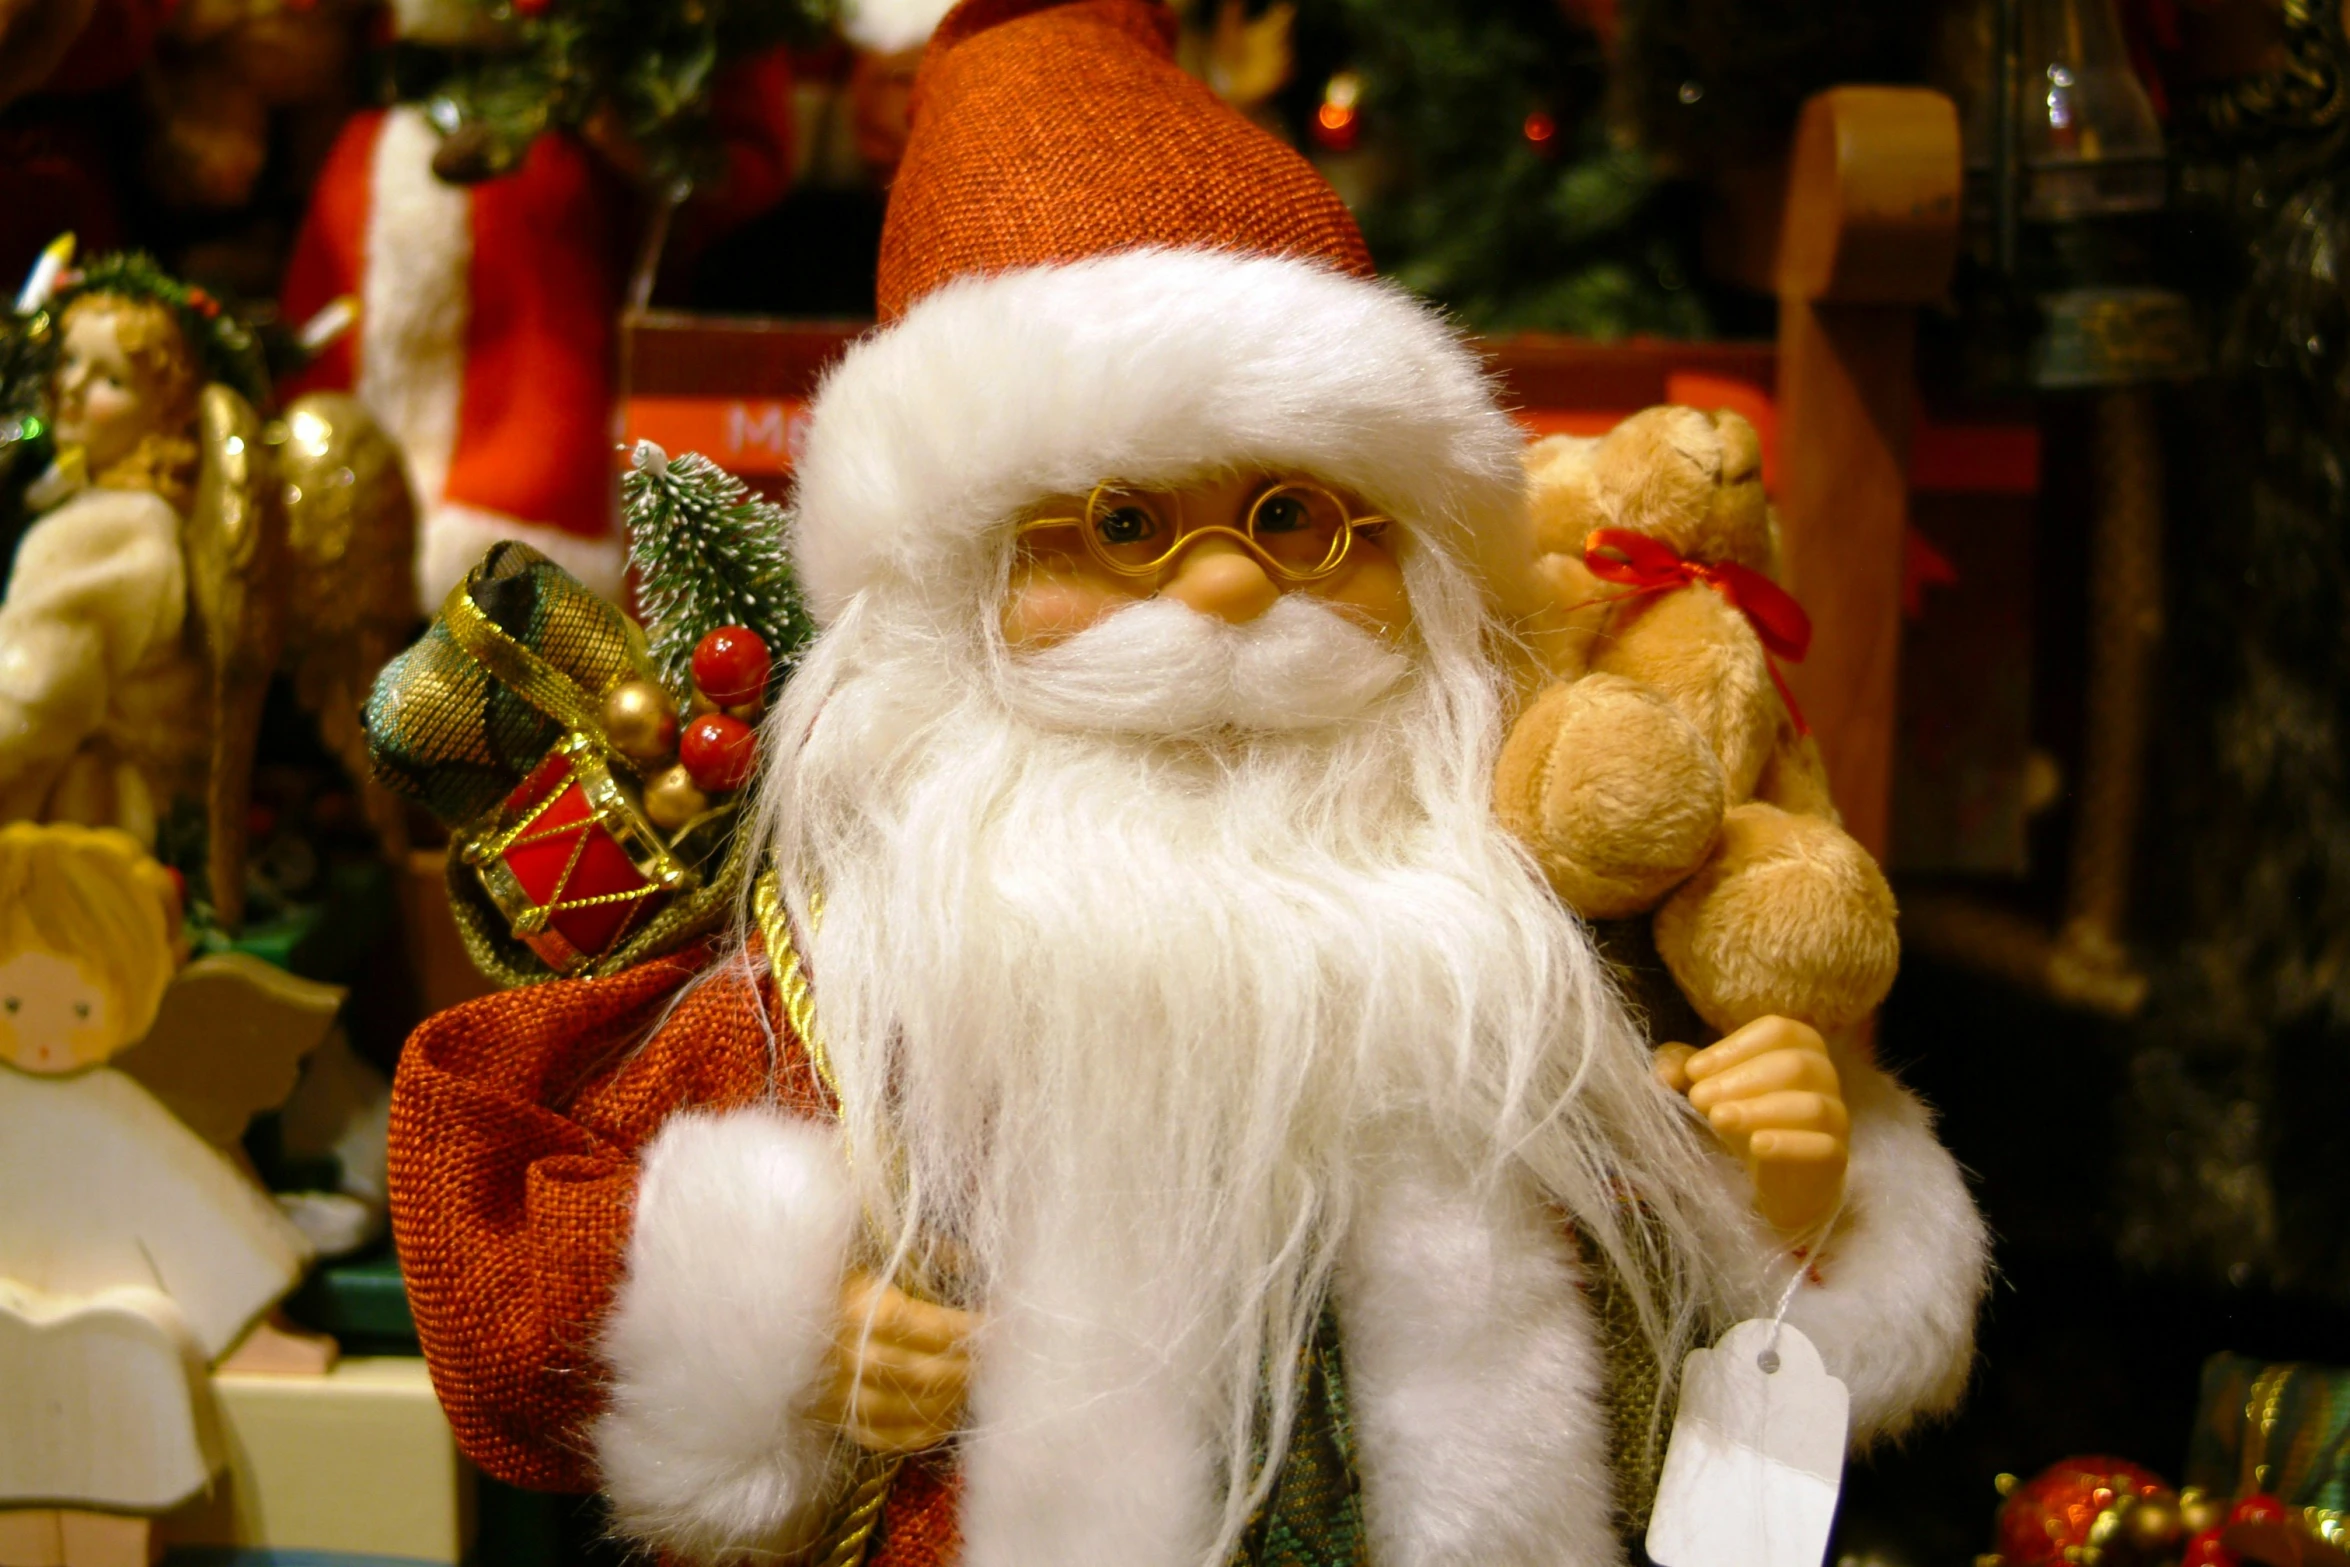 a close up view of santa clause toy with teddy bears